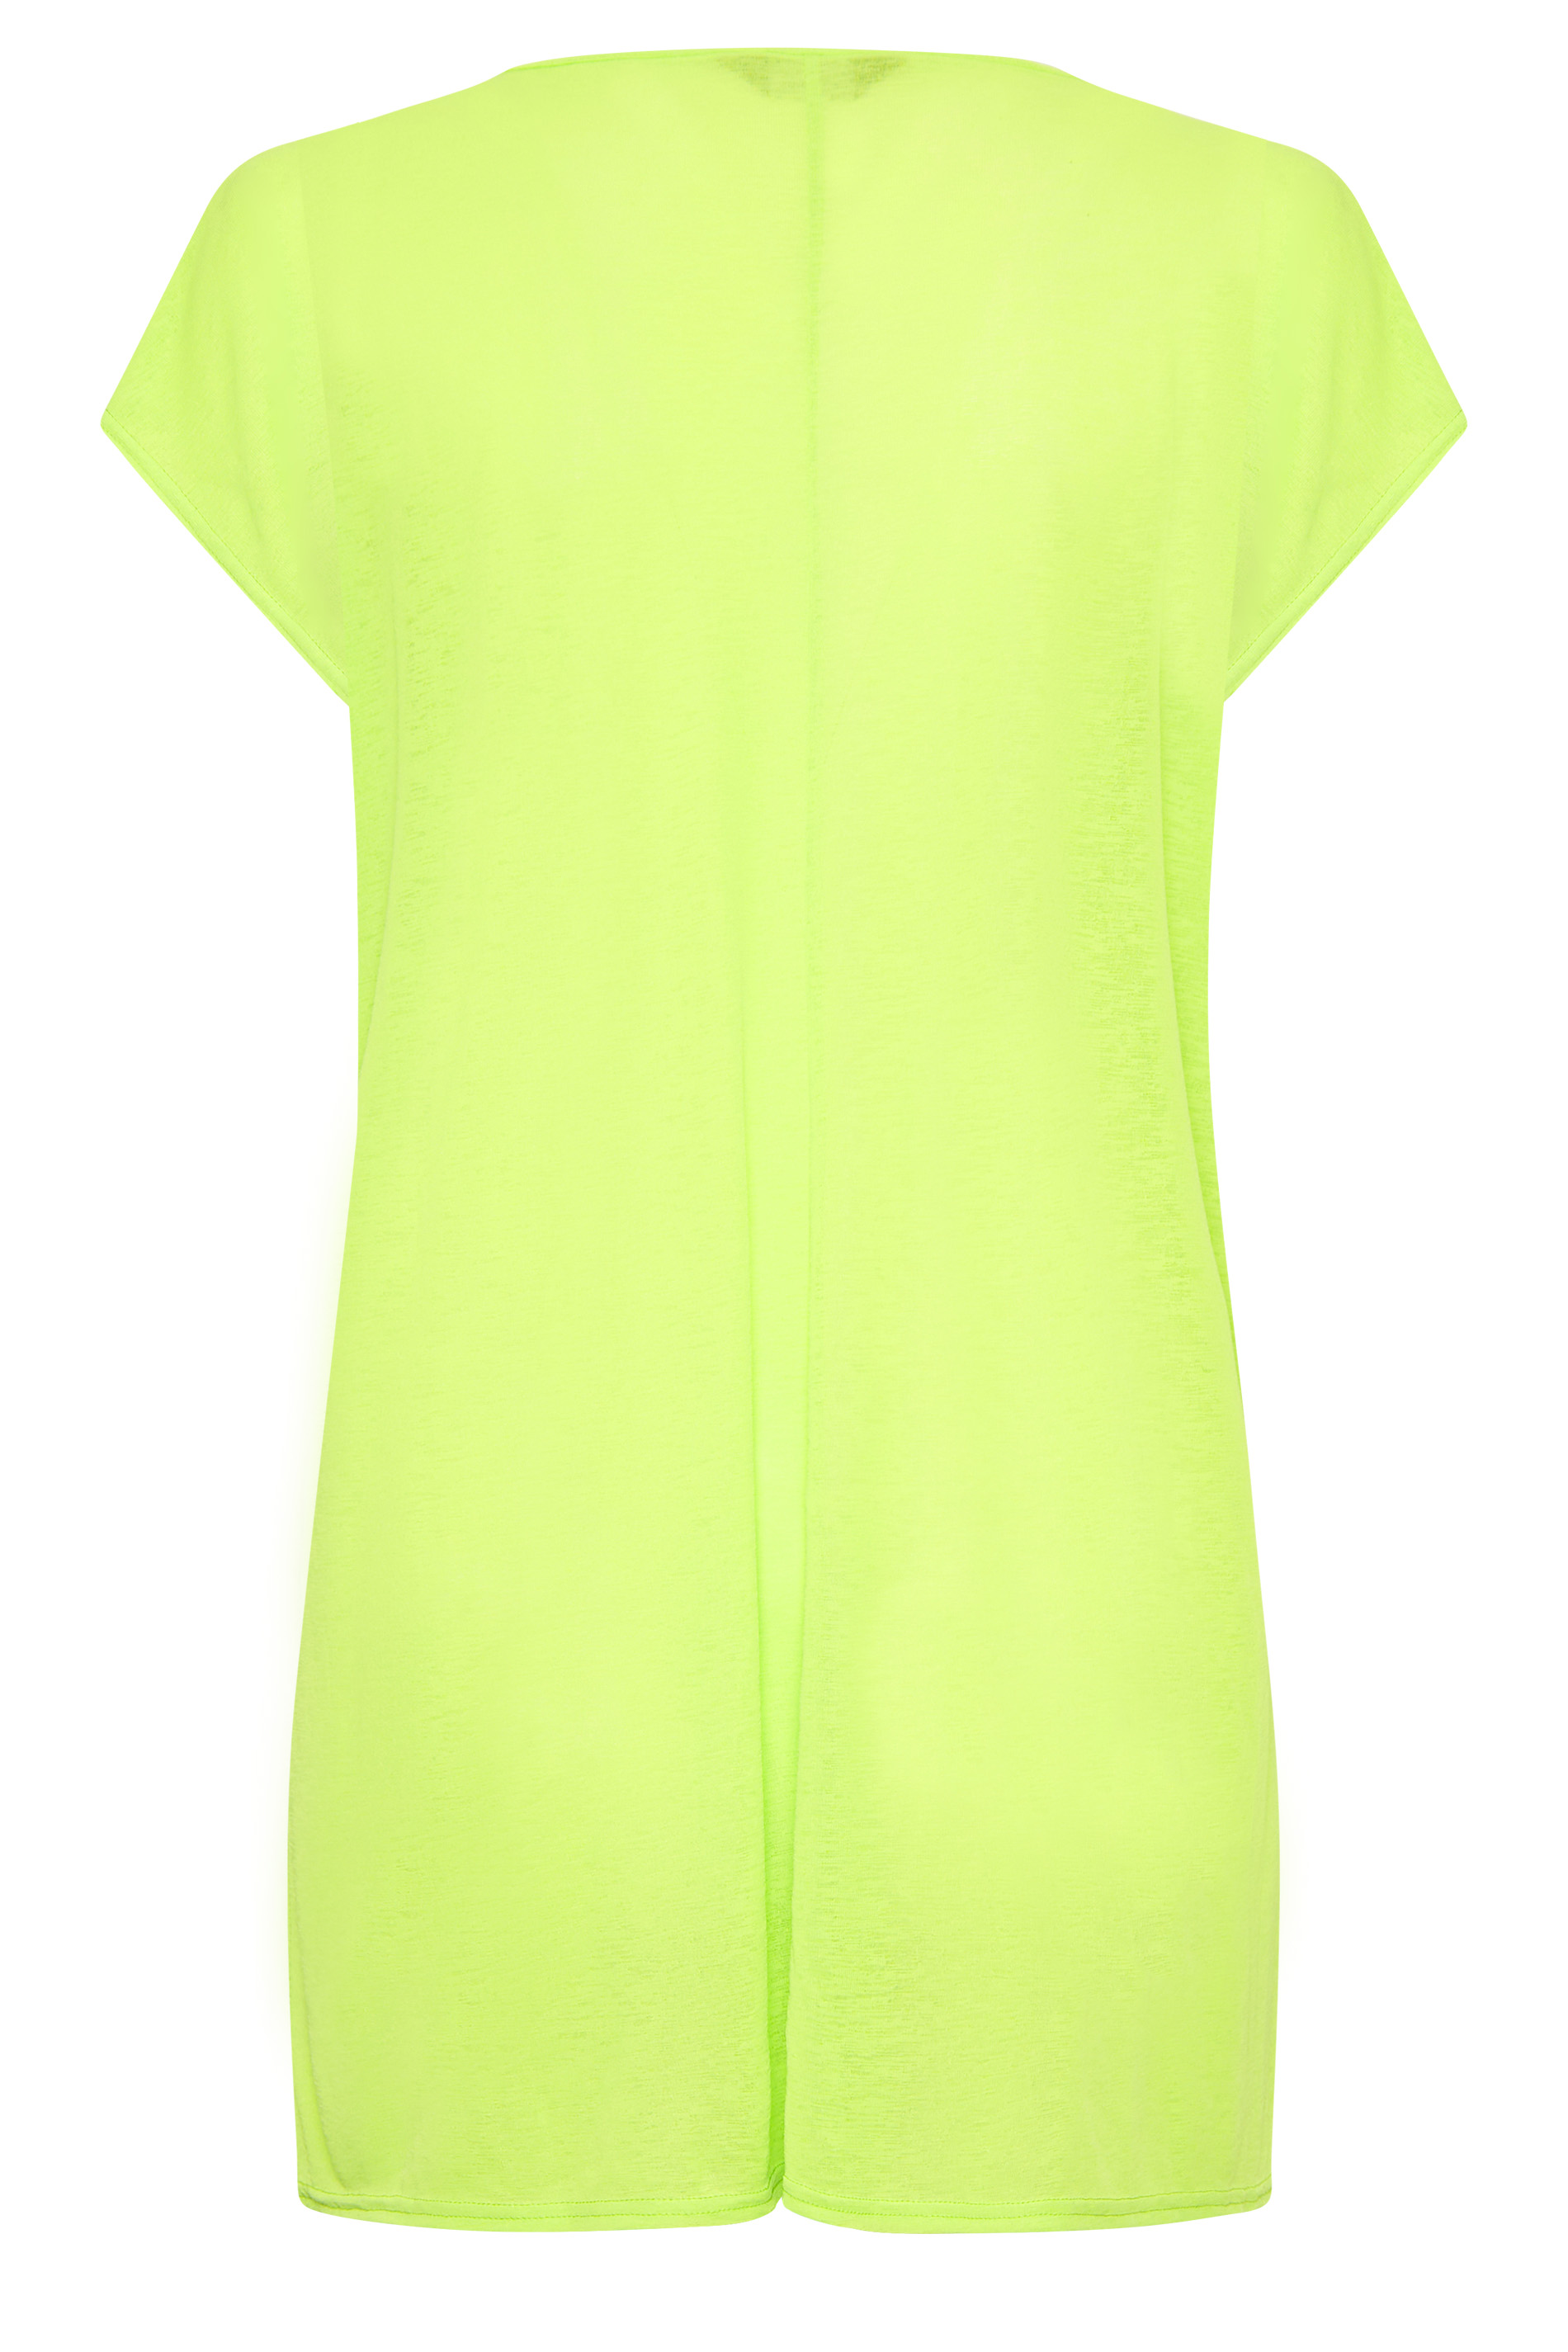 LIMITED COLLECTION Plus Size Lime Green Textured Kimono Cardigan ...